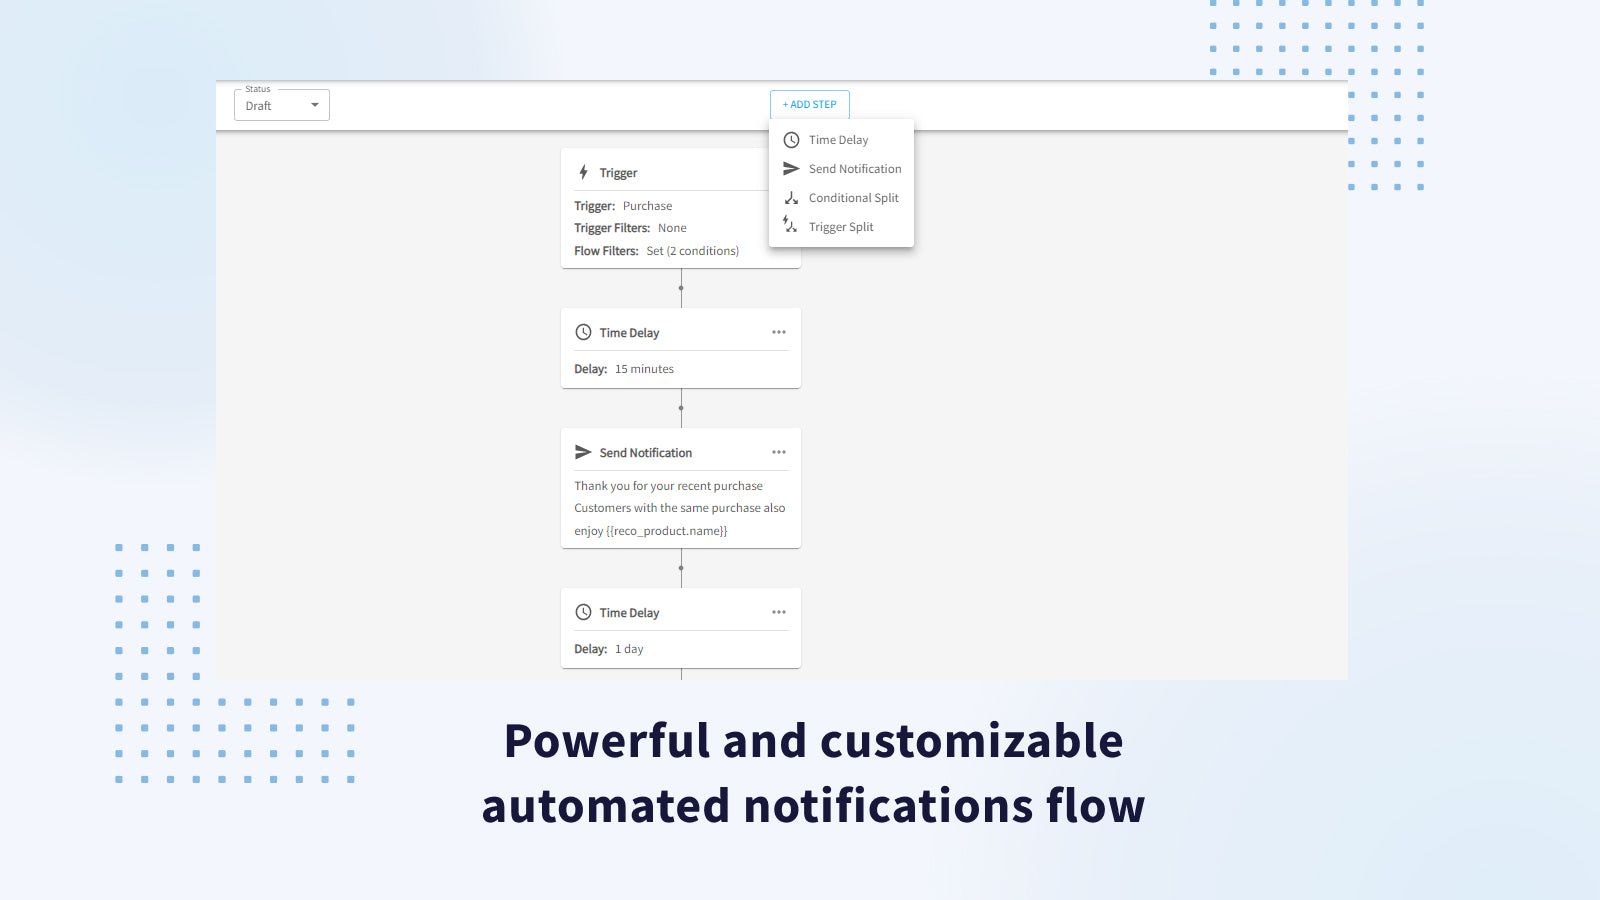 Powerful and customizable automated notifications flow